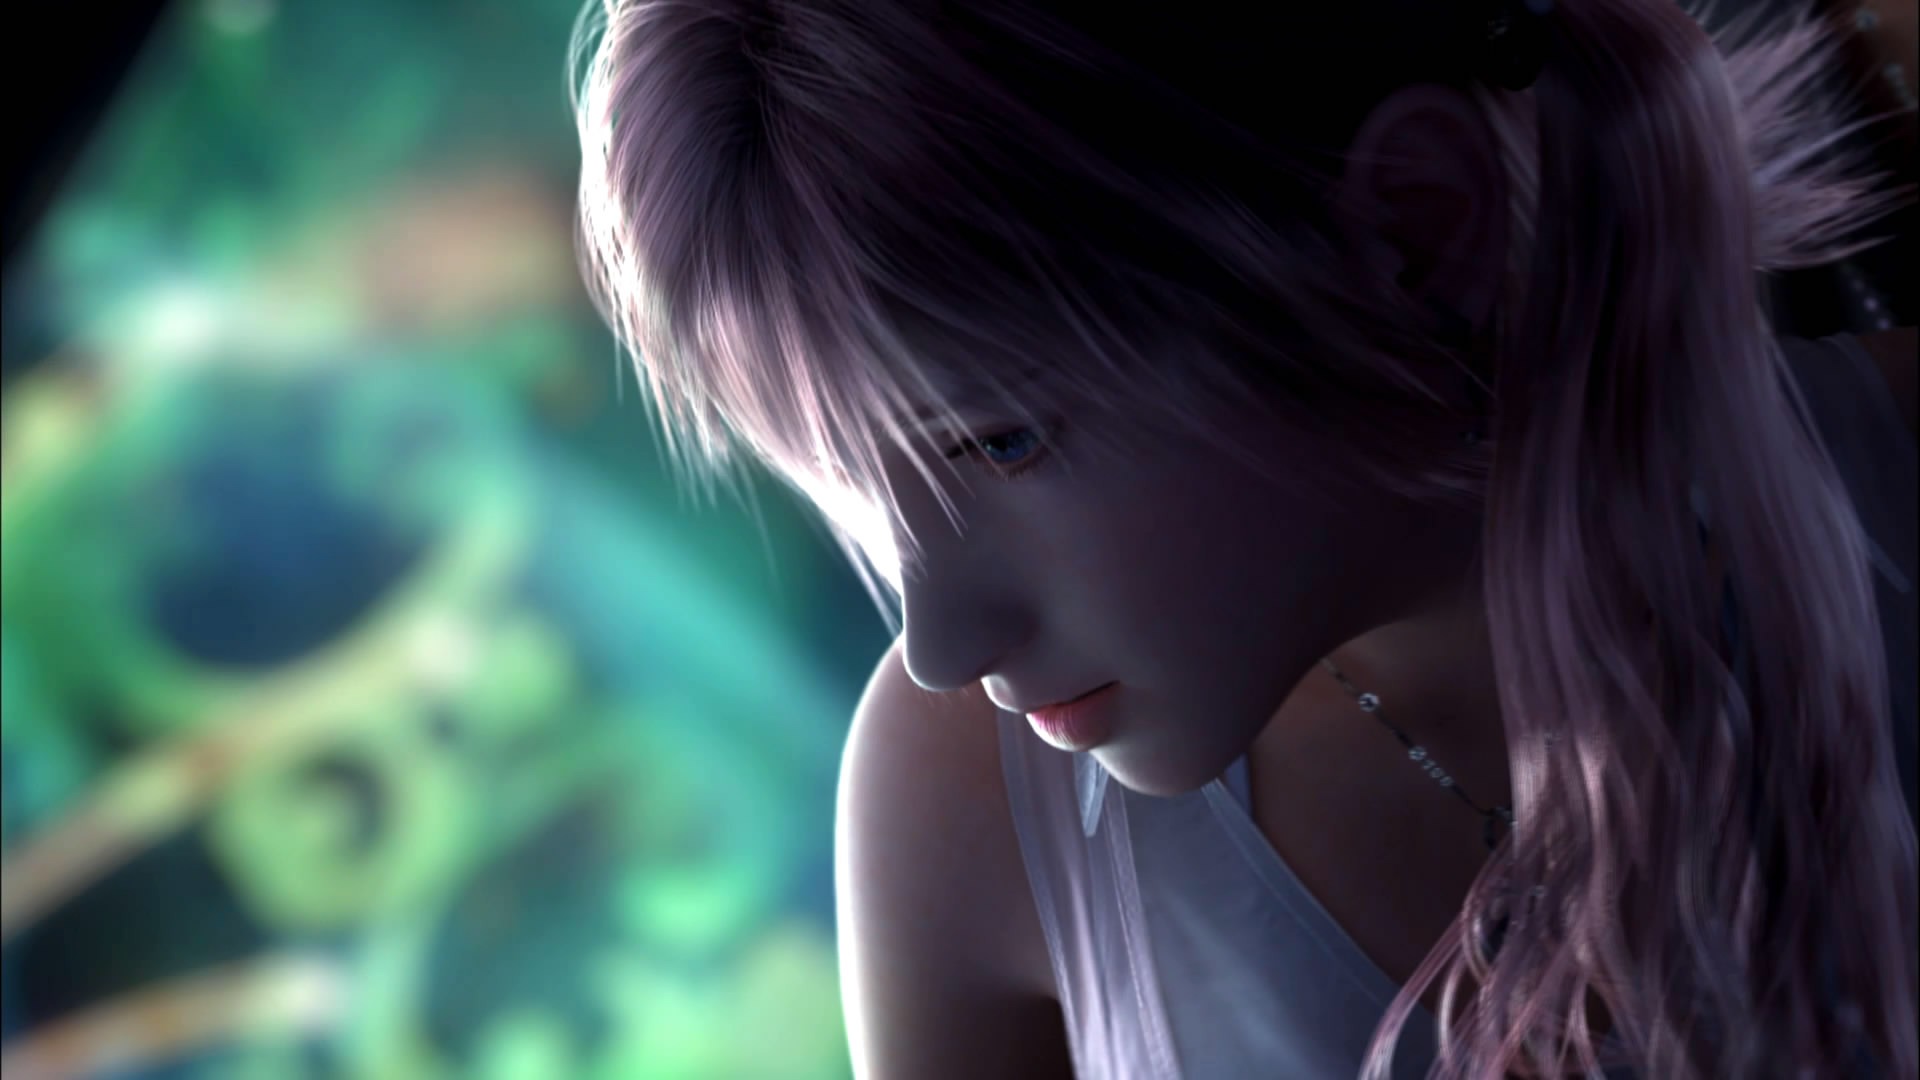 Final Fantasy Wallpapers HD | Wallpapers, Backgrounds, Images, Art ...